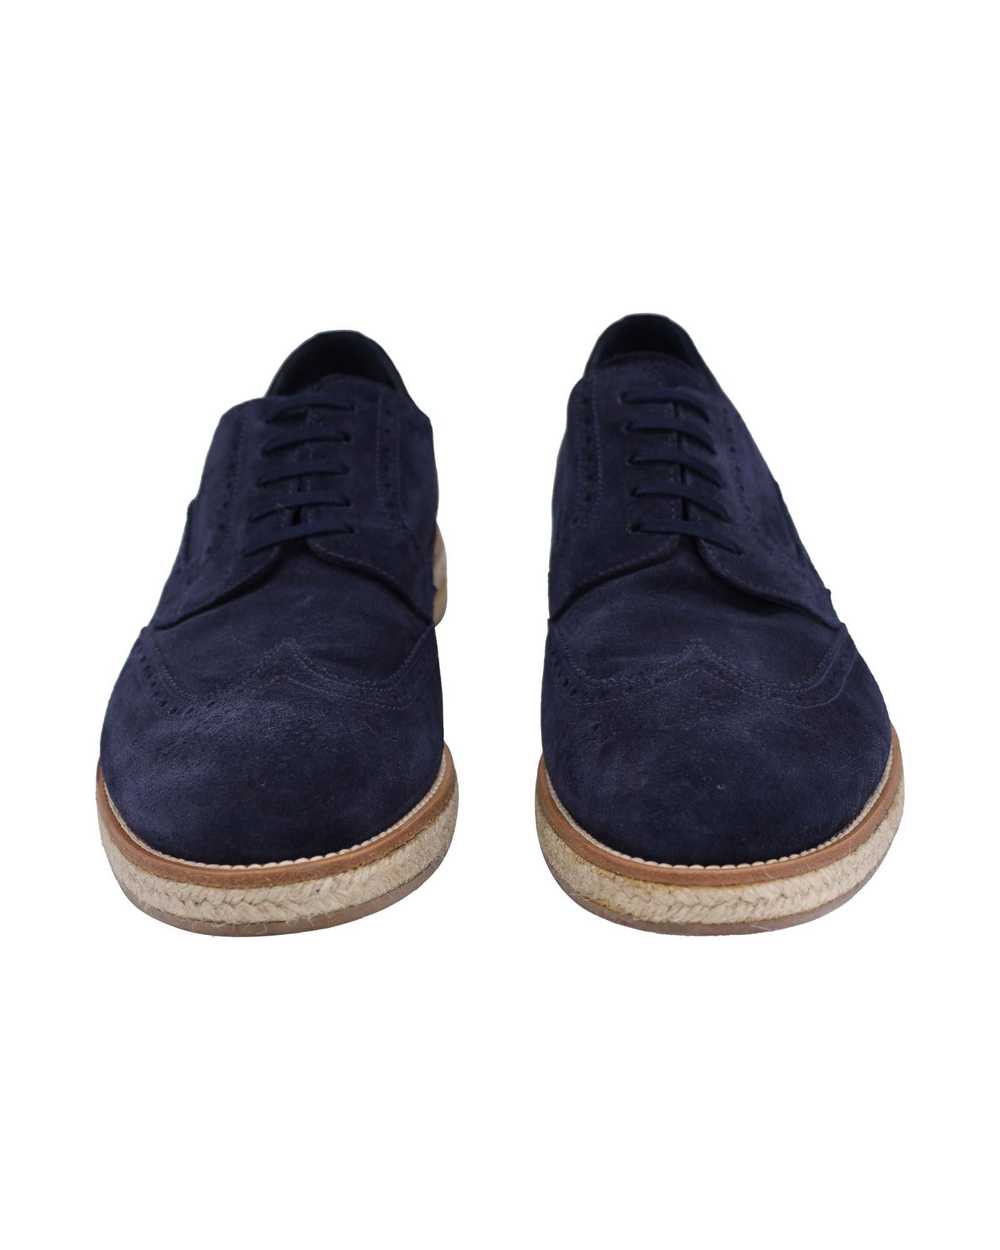 Prada Navy Blue Suede Lace-Up Oxfords with Perfor… - image 5